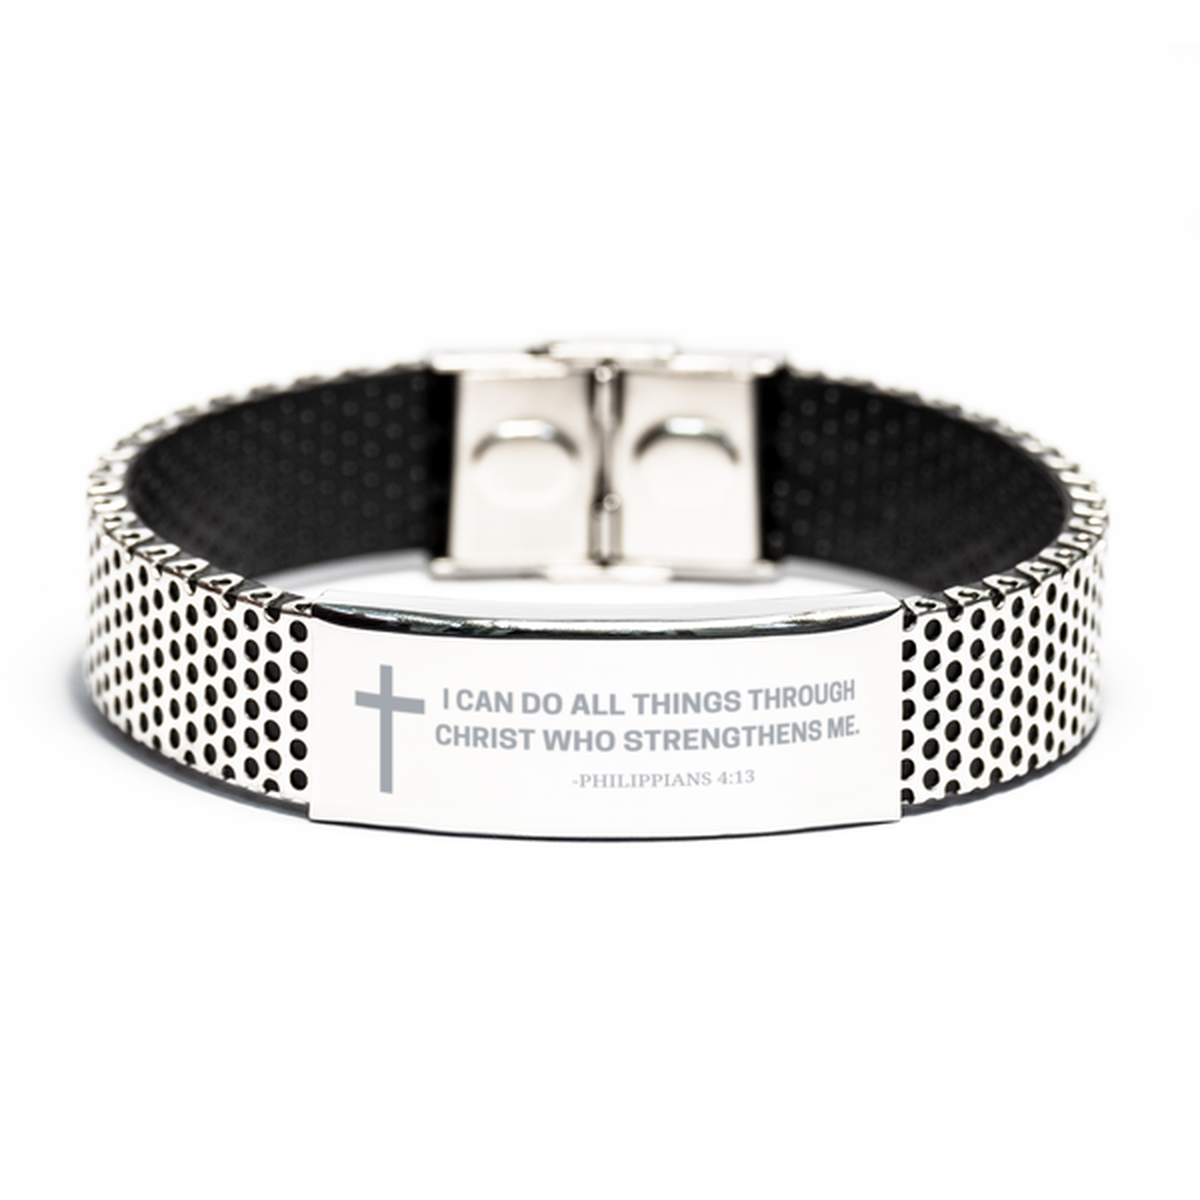 Baptism Gifts For Teenage Boys Girls, Christian Bible Verse Stainless Steel Bracelet, I can do all things through Christ, Catholic Confirmation Gifts for Son, Godson, Grandson, Nephew